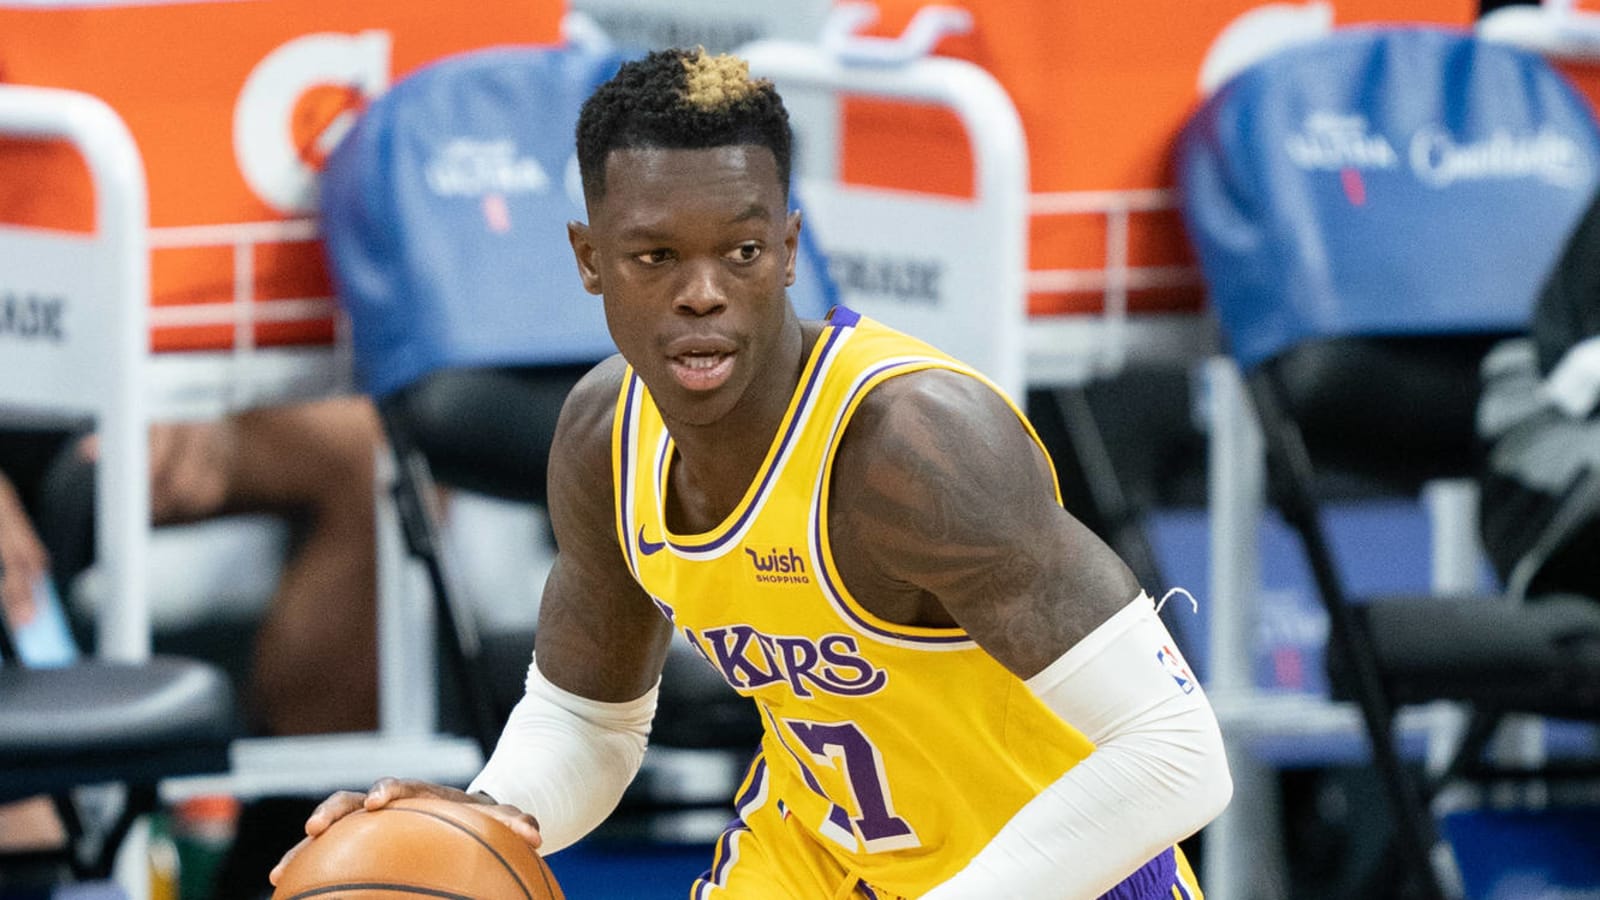 Lakers point guard Dennis Schroder likely to test free agency